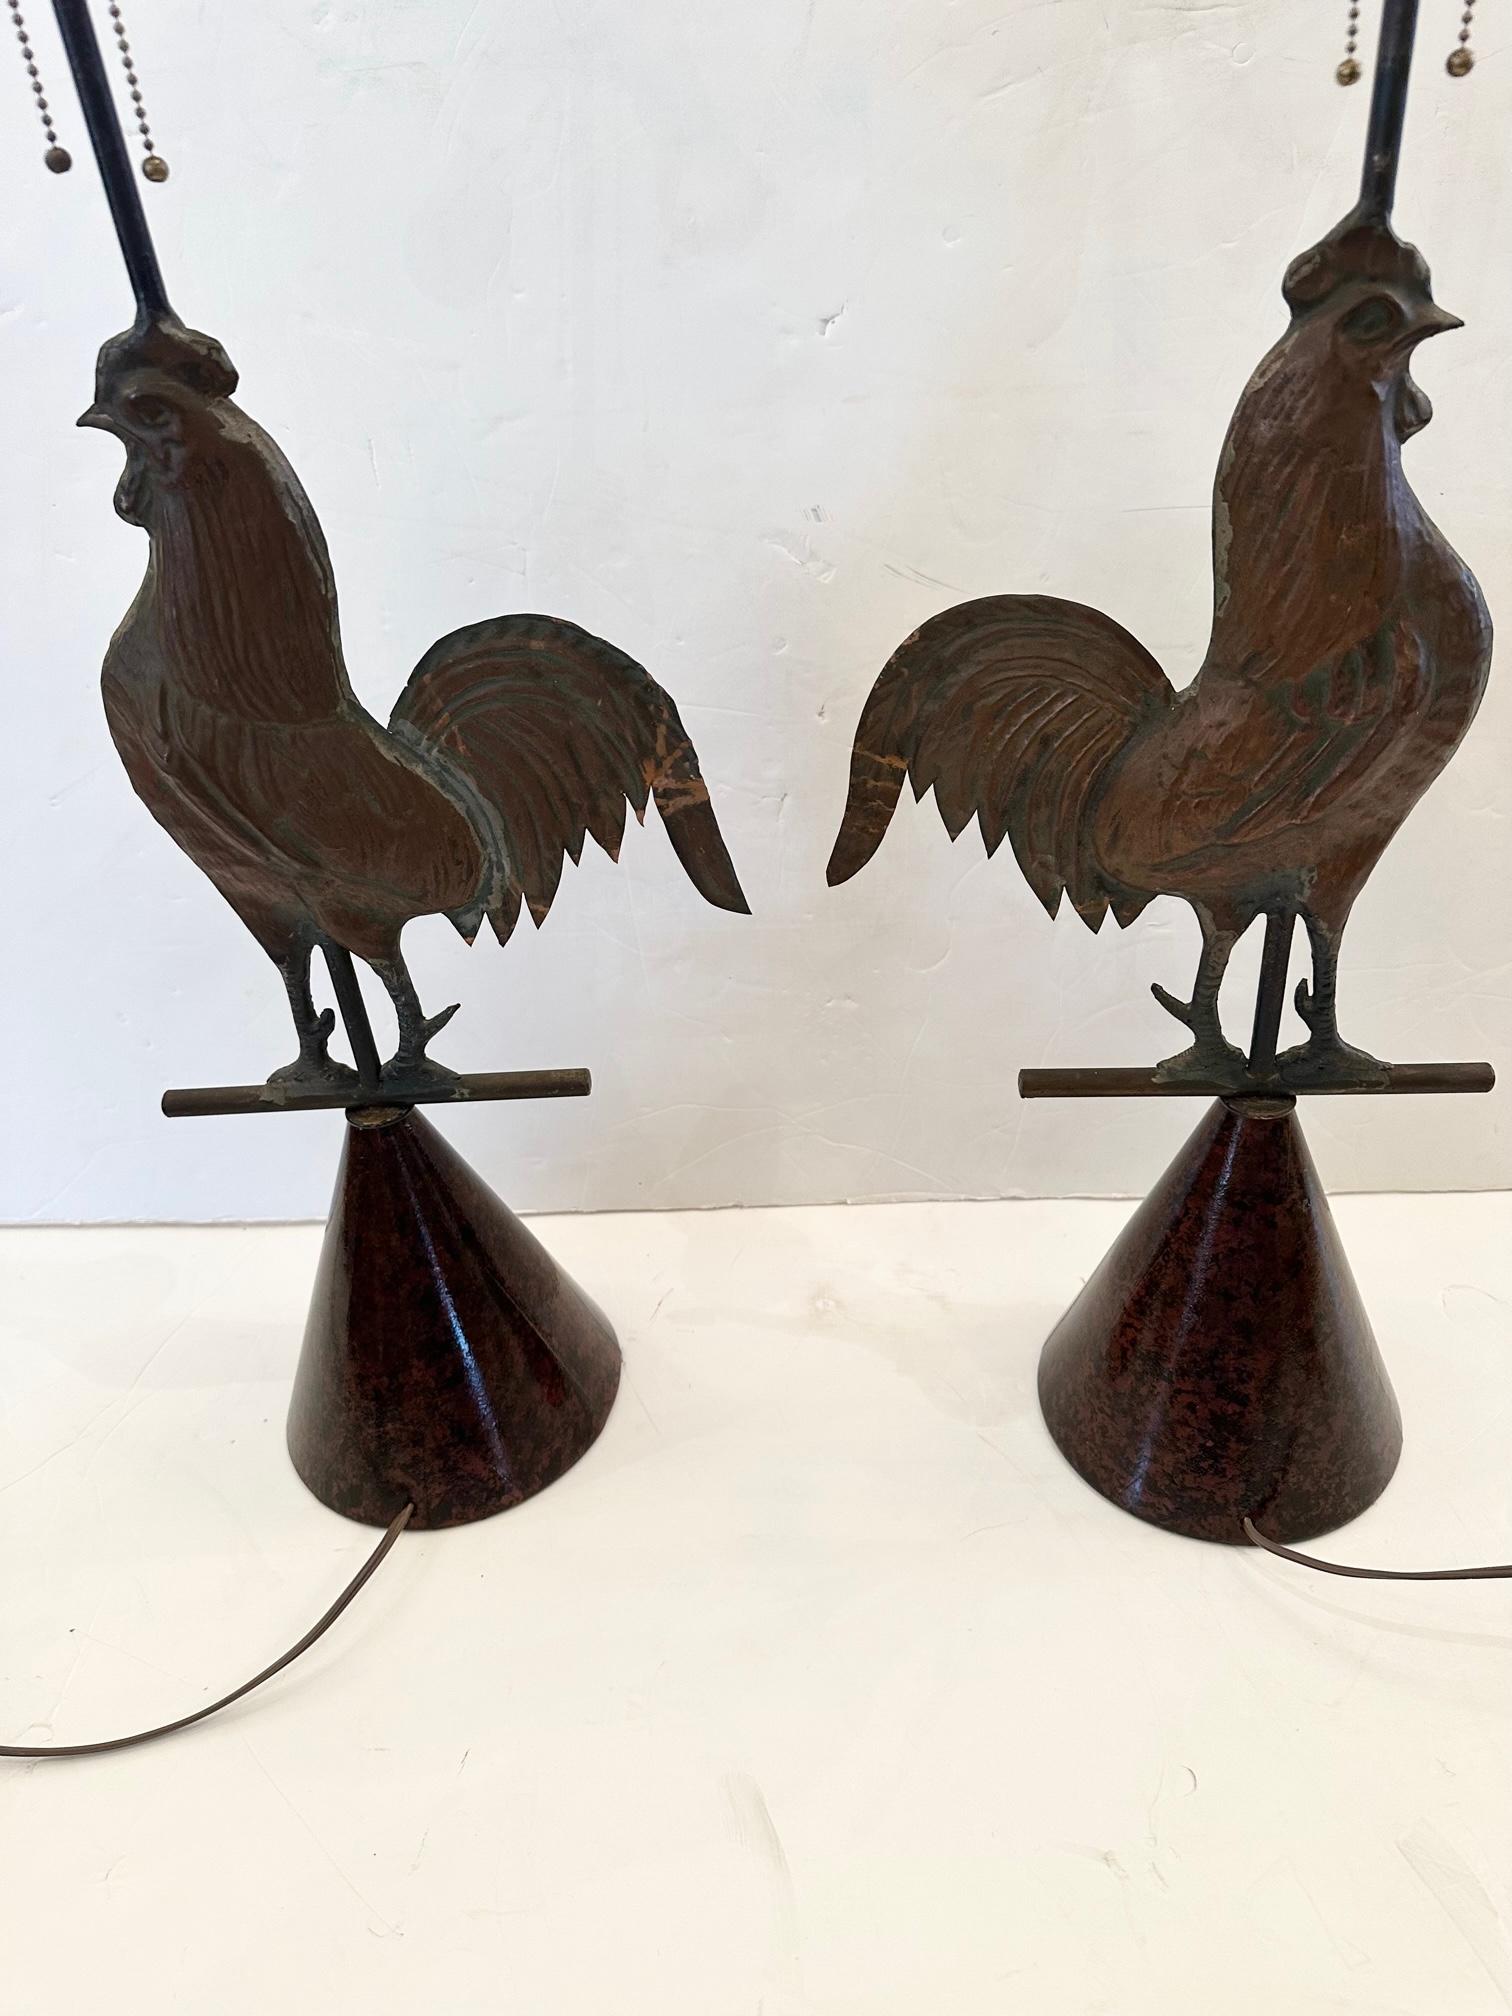 Rooster lovers whimsical pair of custom table lamps made from vintage metal rooster sculptures and paired with fabulous handpainted shades.
Diameter of bases 7